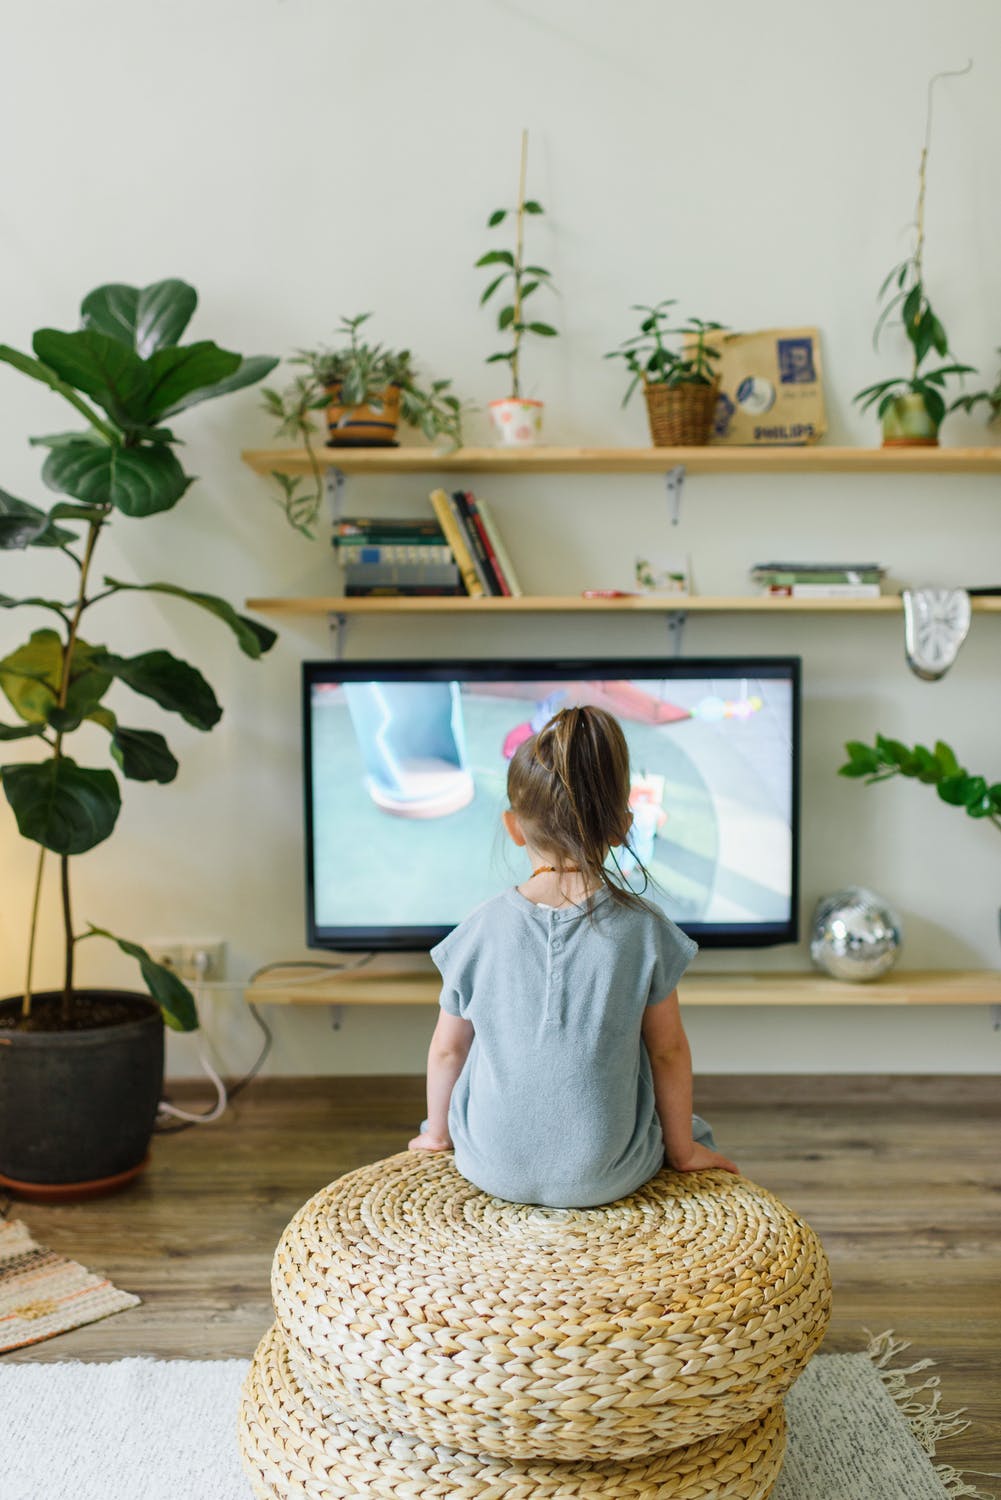 My daughters were watching TV after dinner | Source: Pexels